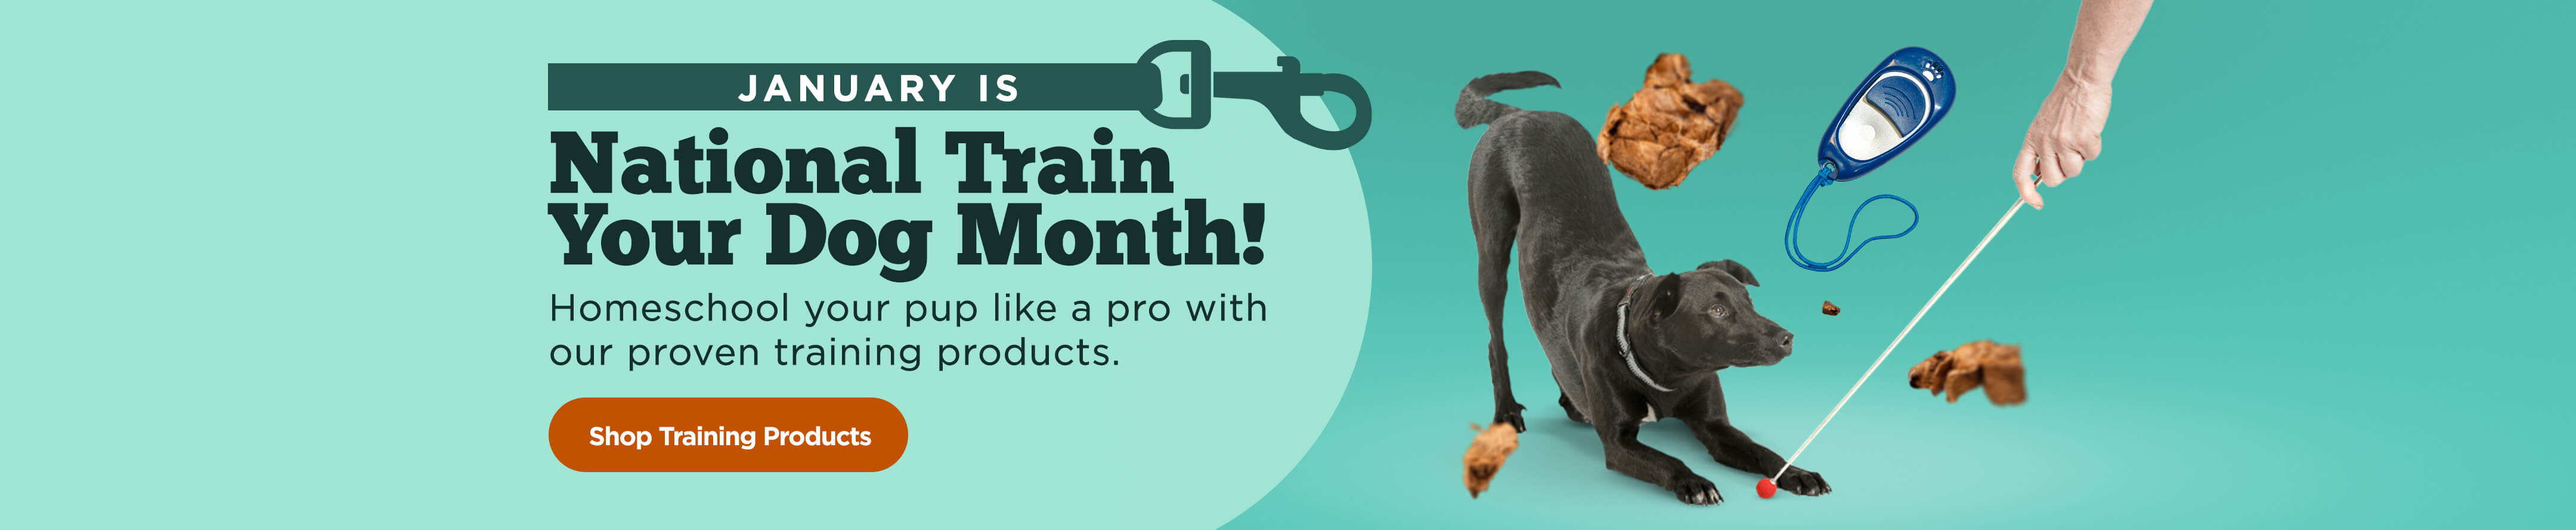 January is National Train Your Dog Month! Homeschool your pup like a pro with our proven training products - Shop Now